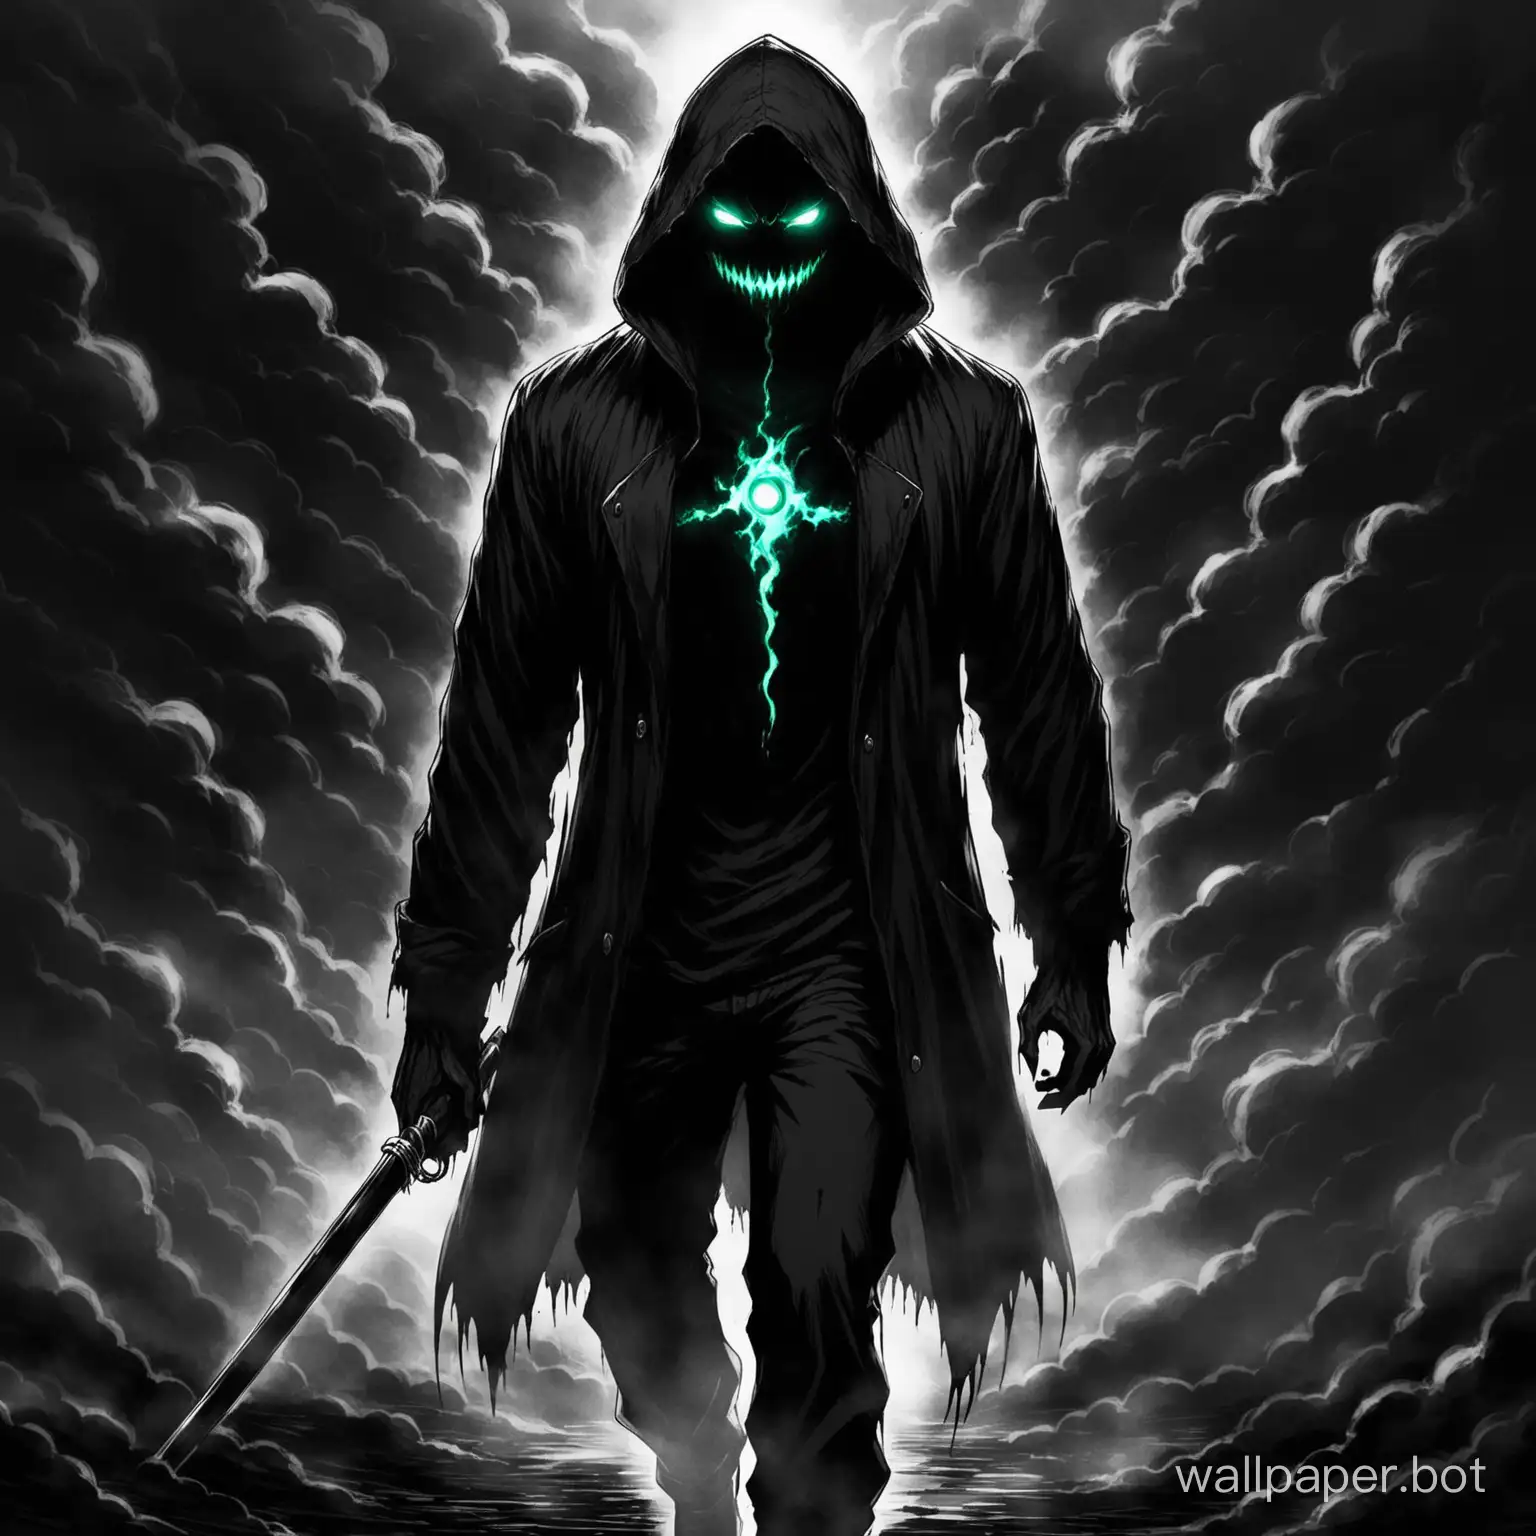 a guy walking towards me and blackshadow face i cant be seen cyz its to dark and many blacksmoke  out of his body and glowing fierce eye   justlike a nightmare